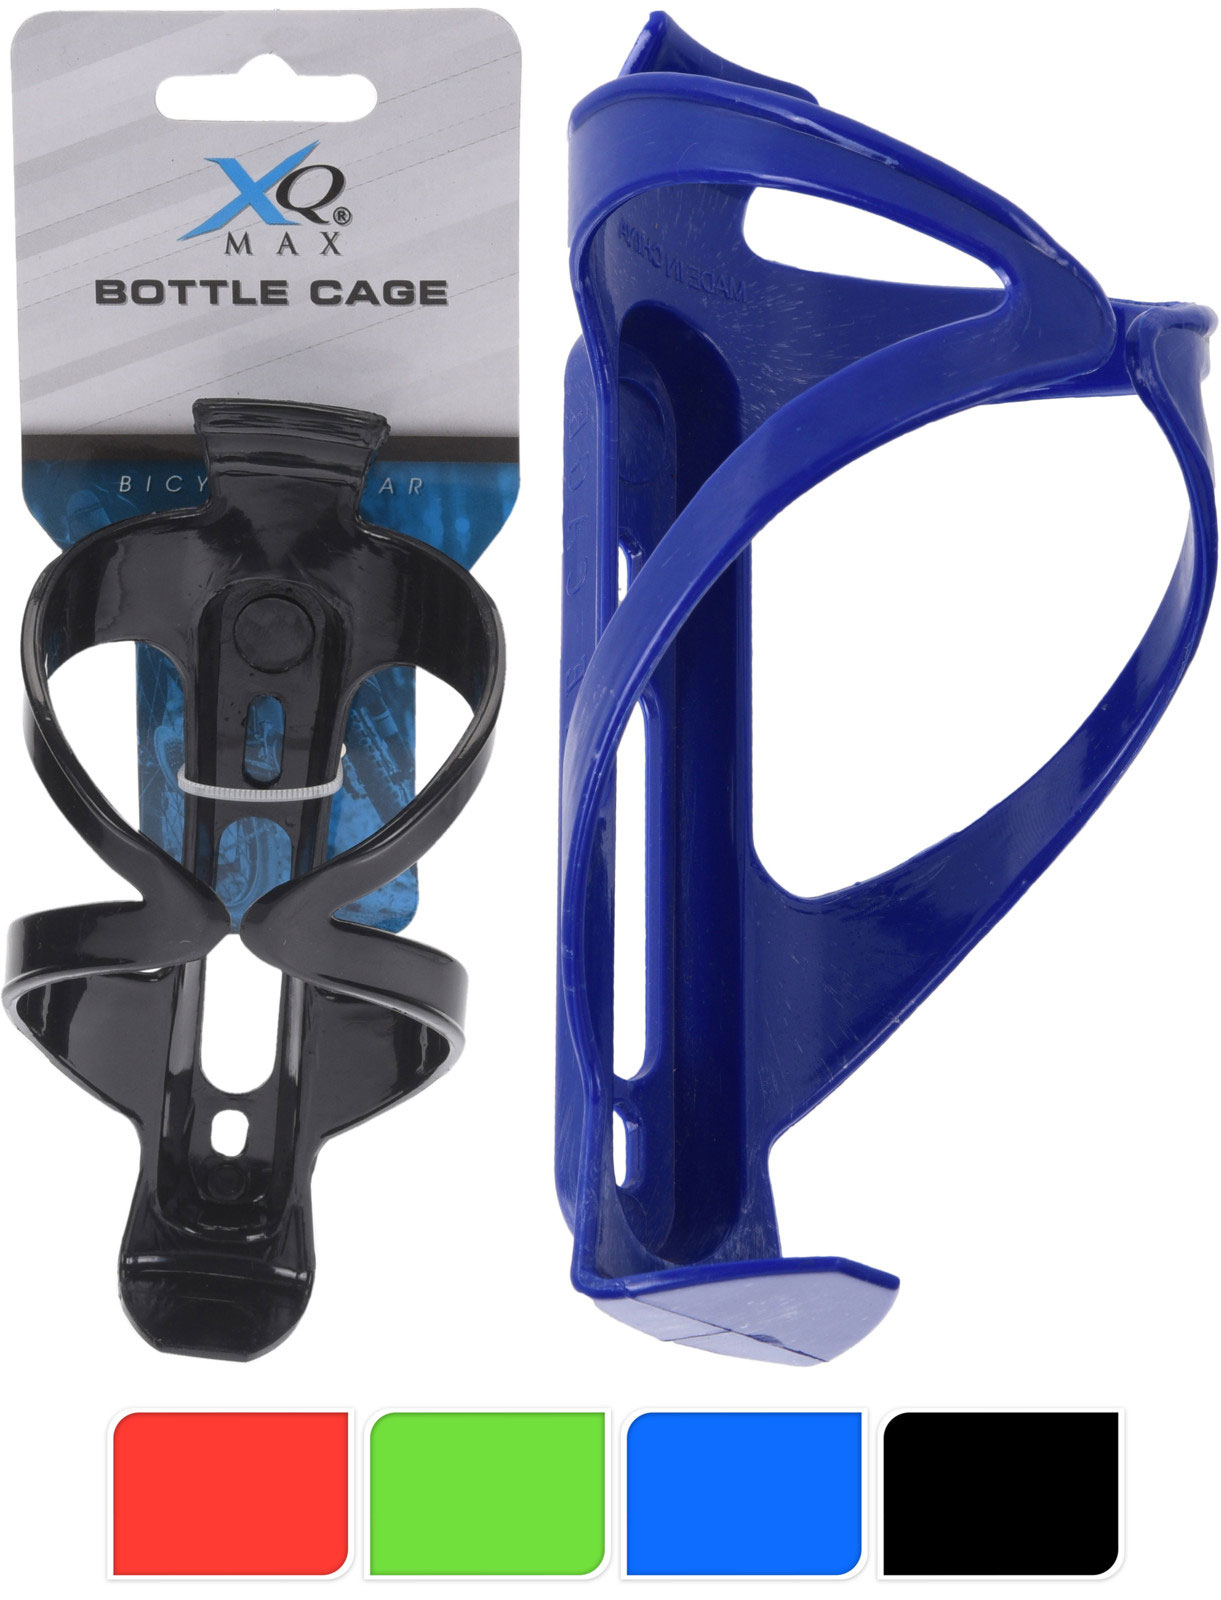 XQMAX BICYCLE BOTTLE CAGE 4 ASSORTED COLORS